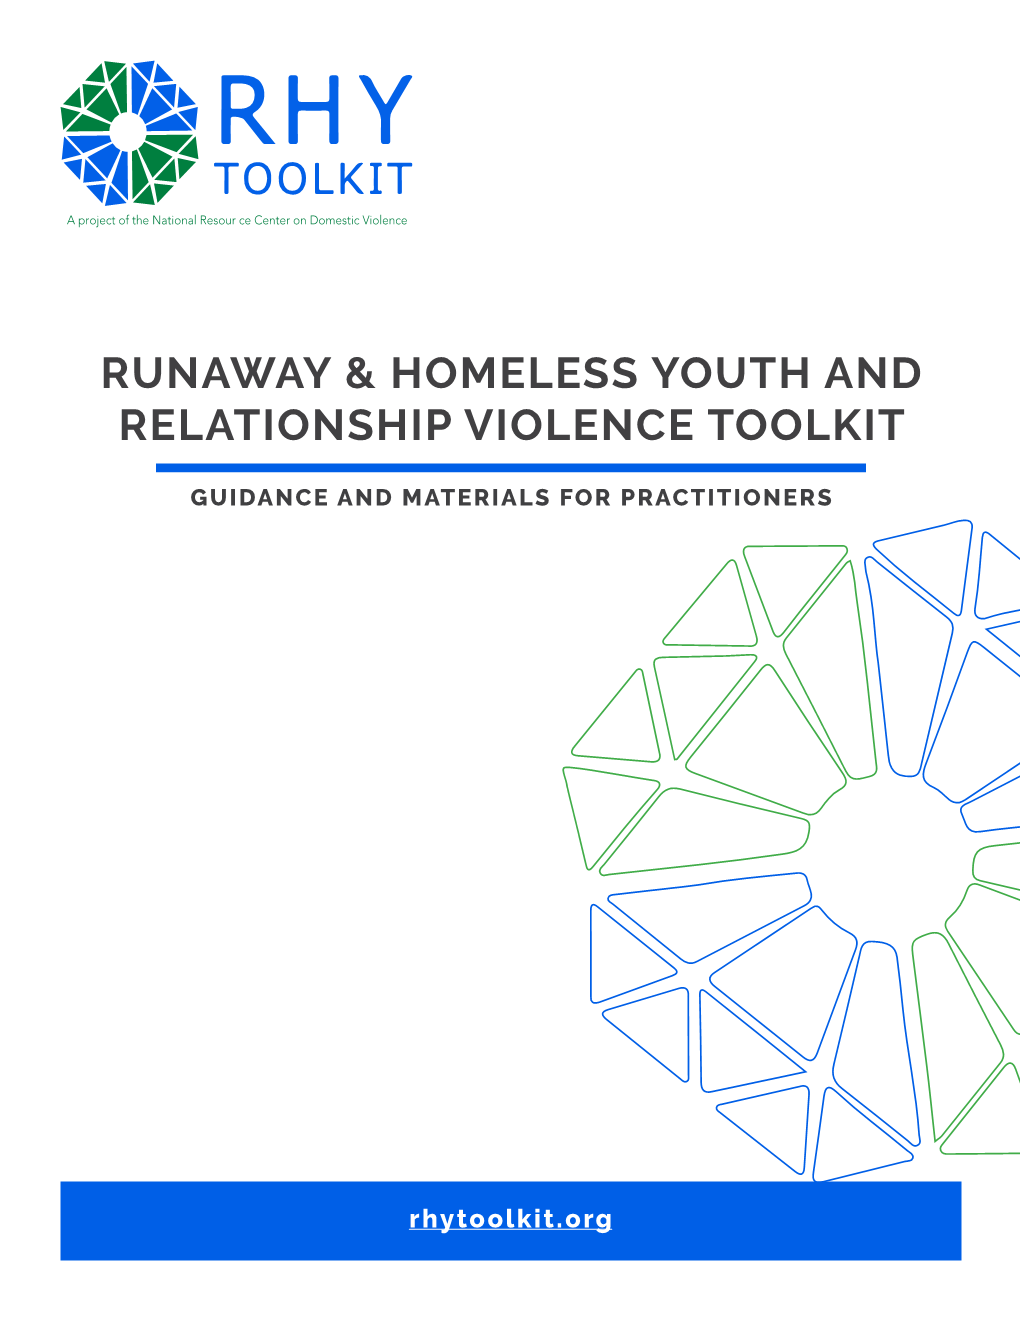 Download RHY Toolkit